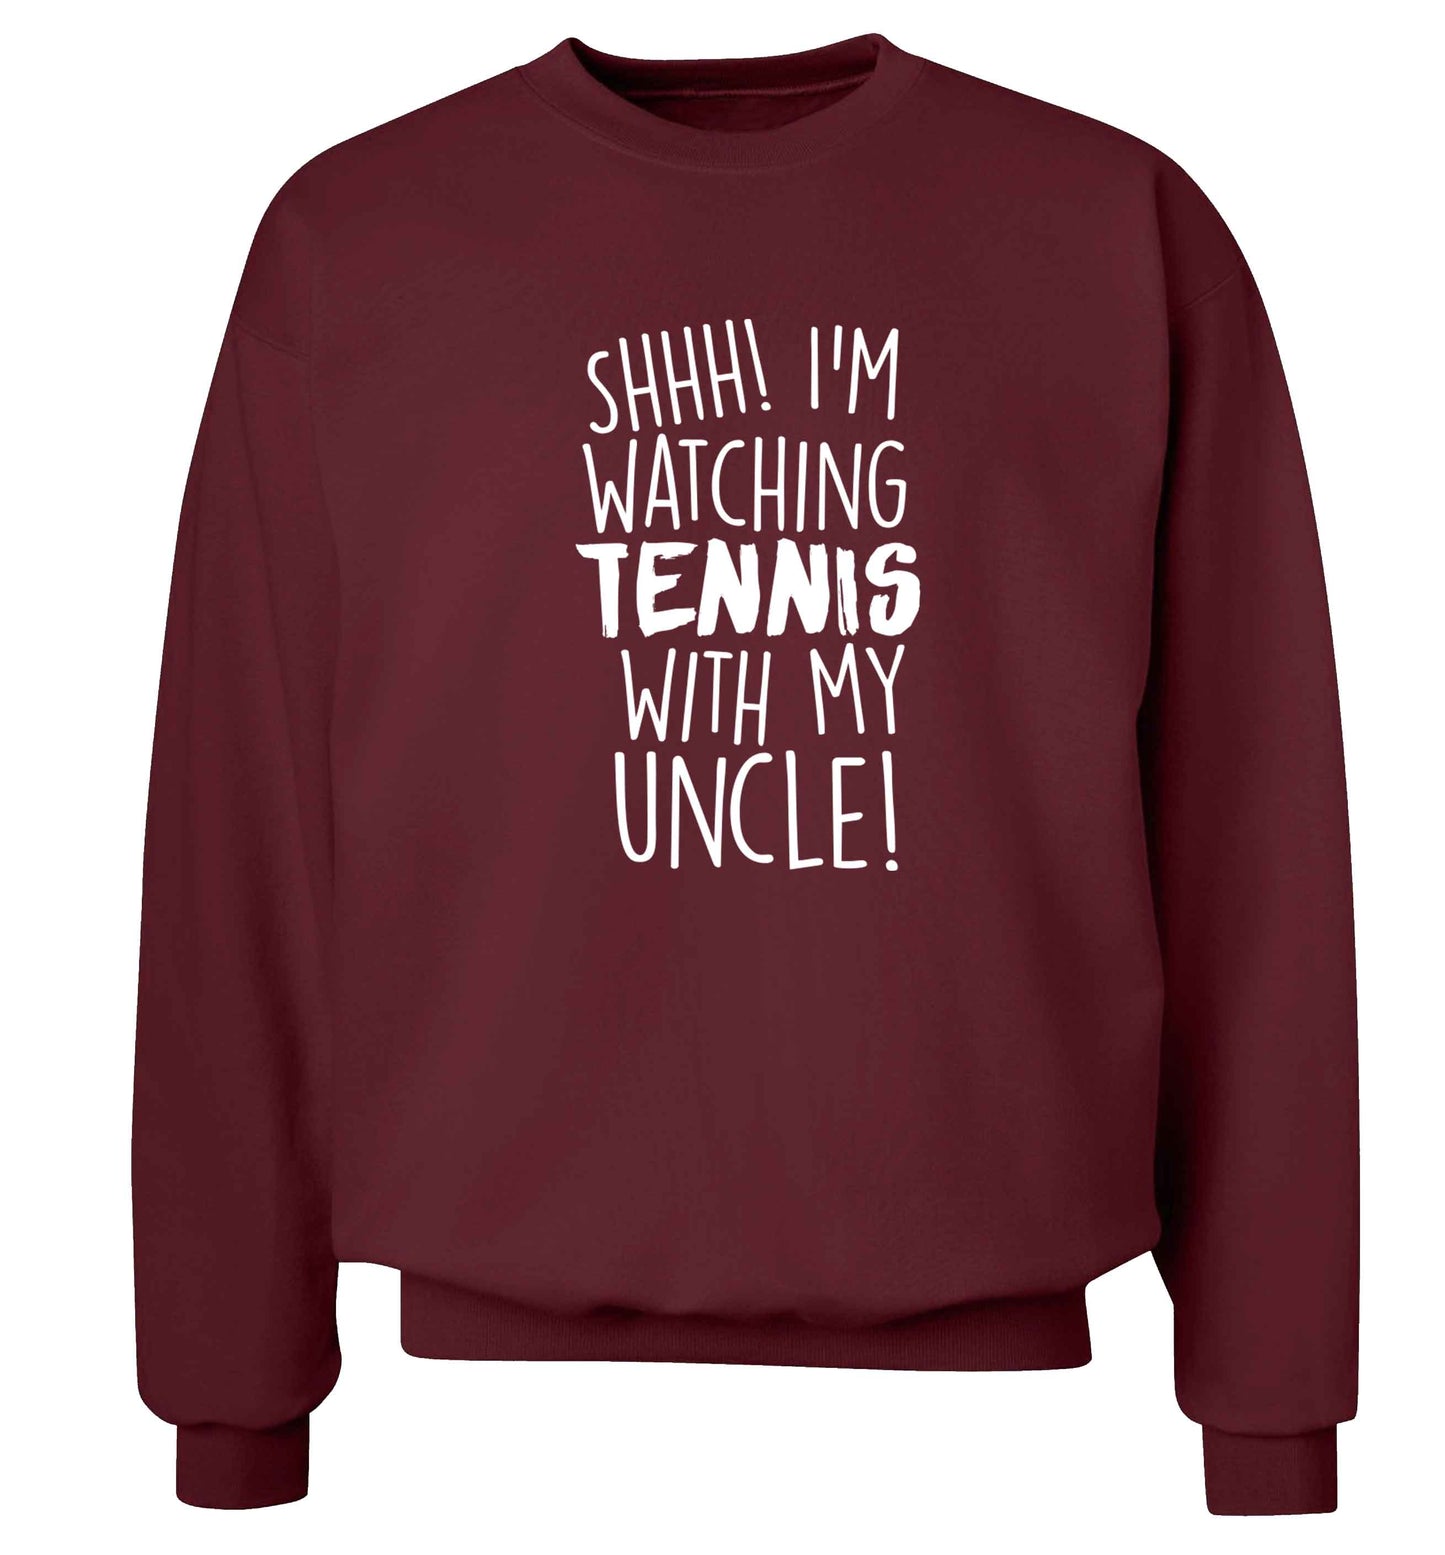 Shh! I'm watching tennis with my uncle! Adult's unisex maroon Sweater 2XL